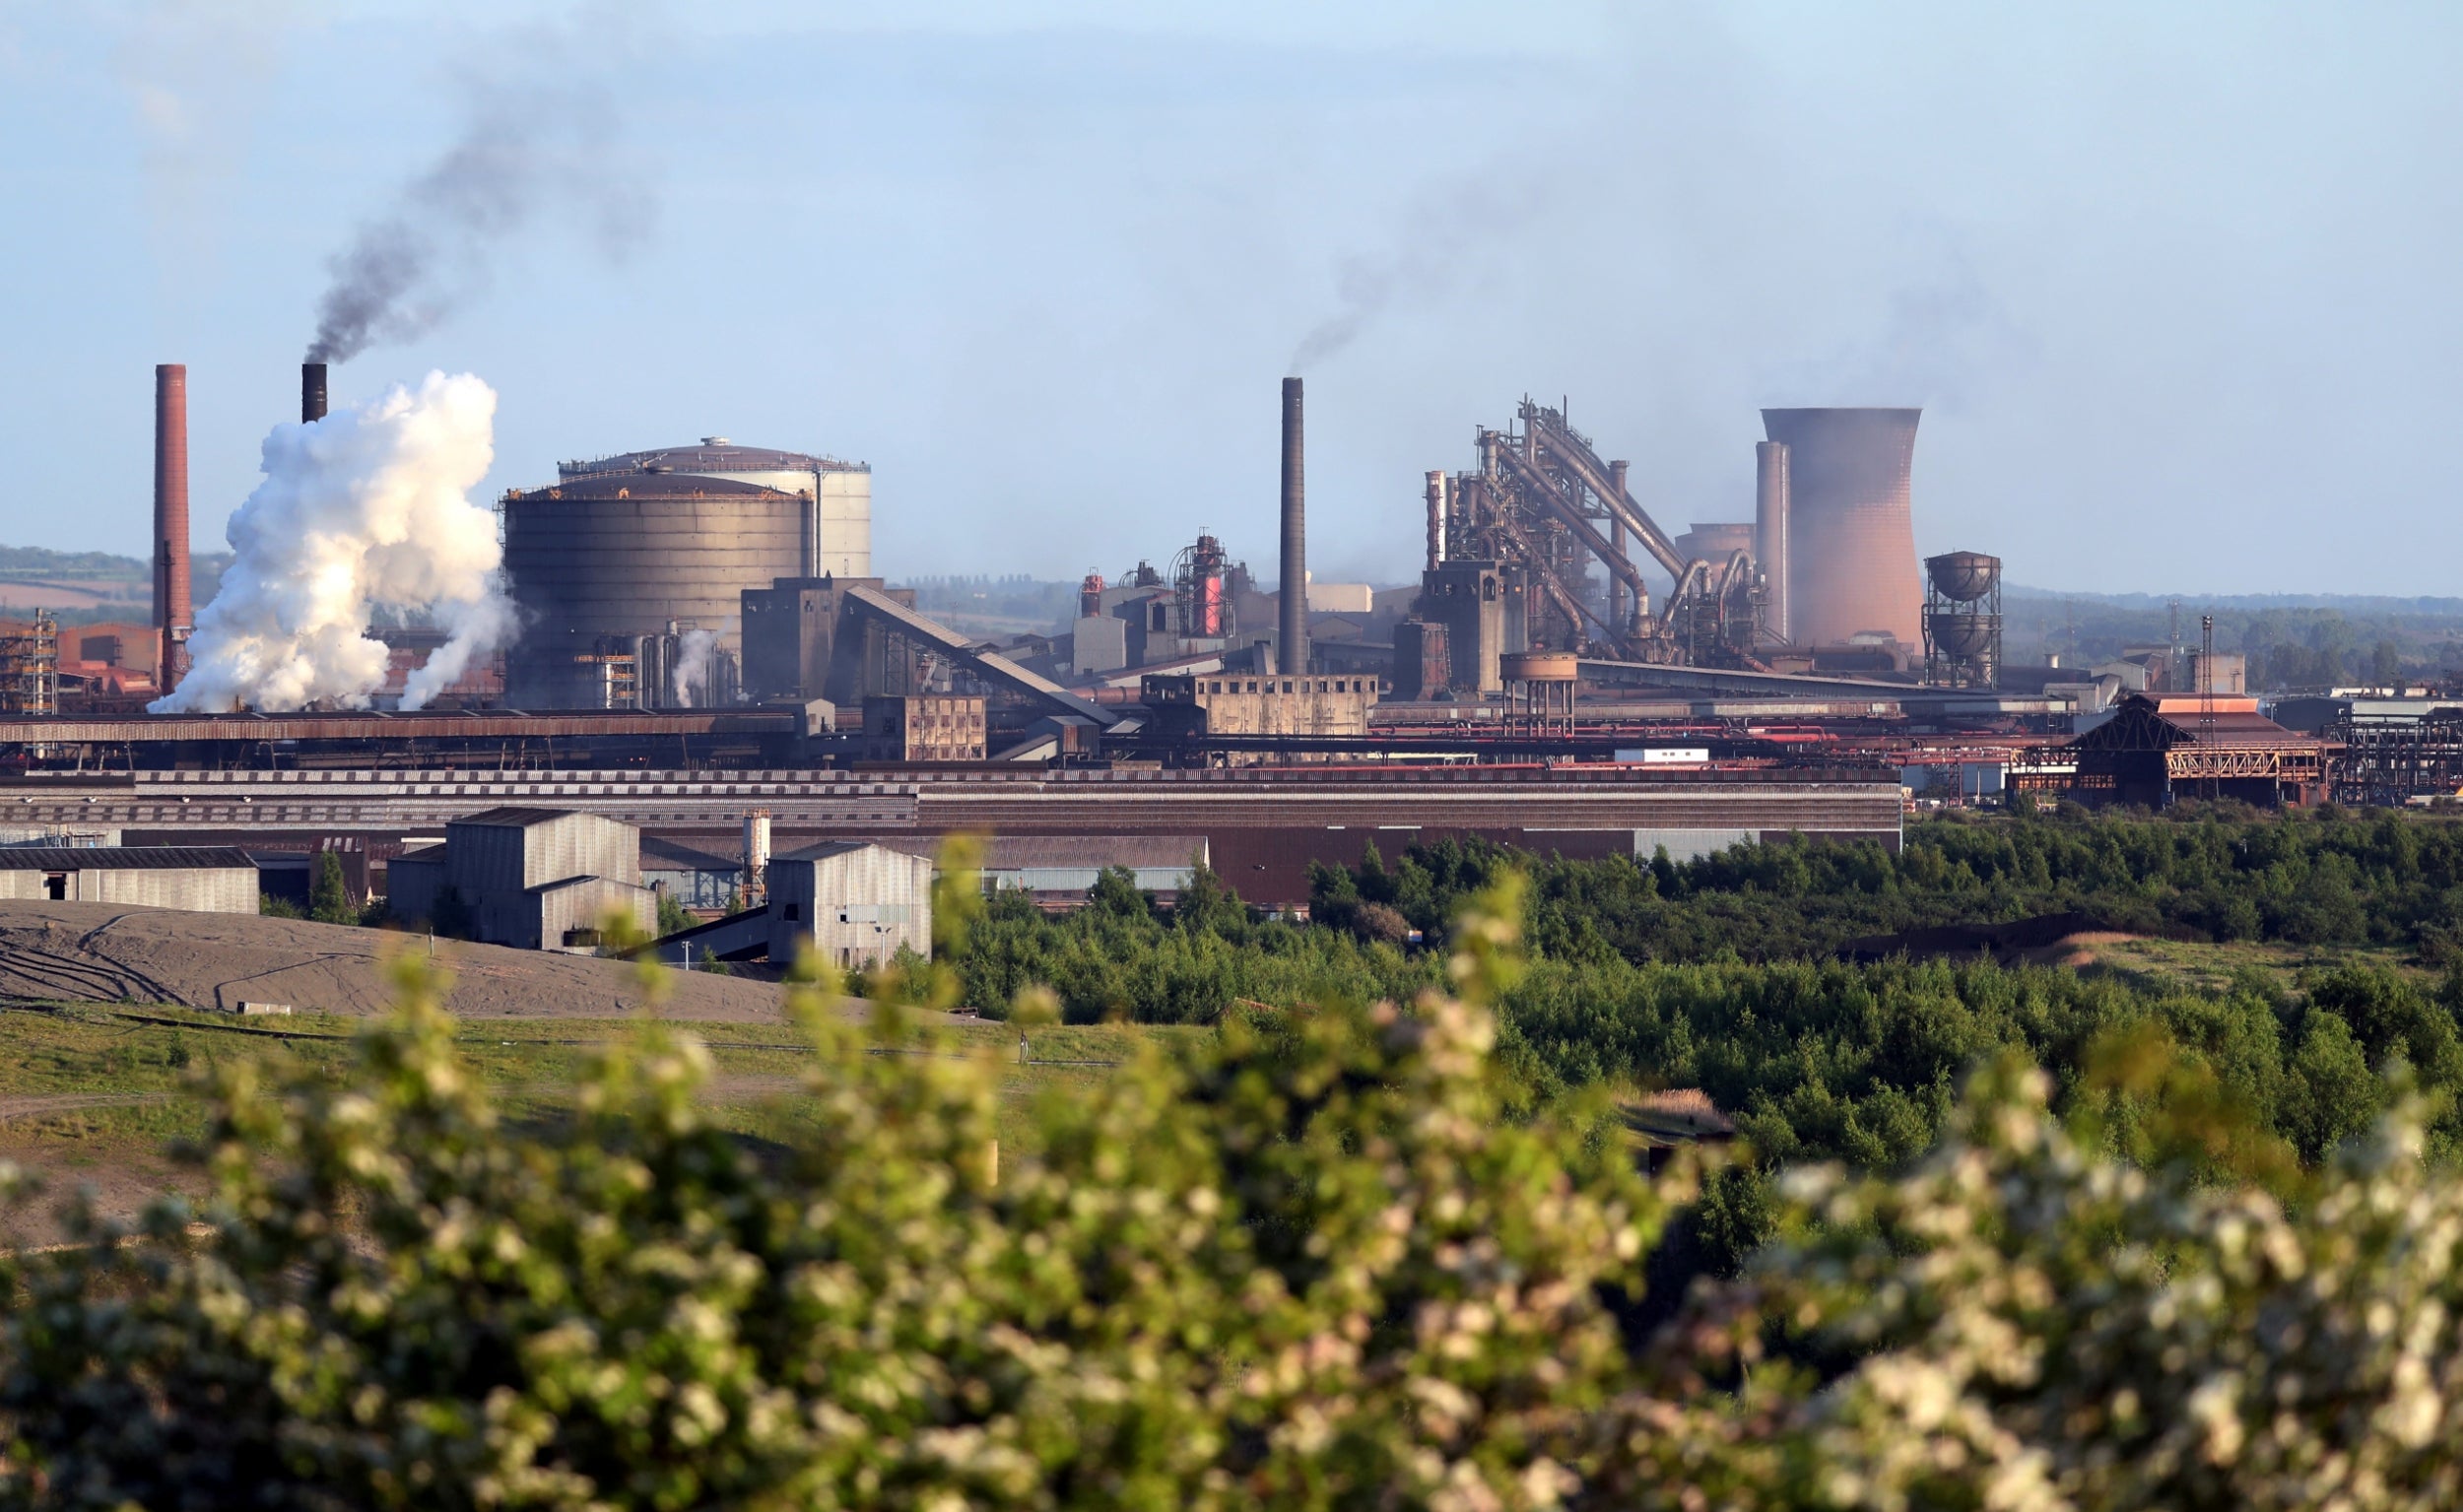 British Steel’s main plant in Scunthorpe (pictured) employs 3,000 people